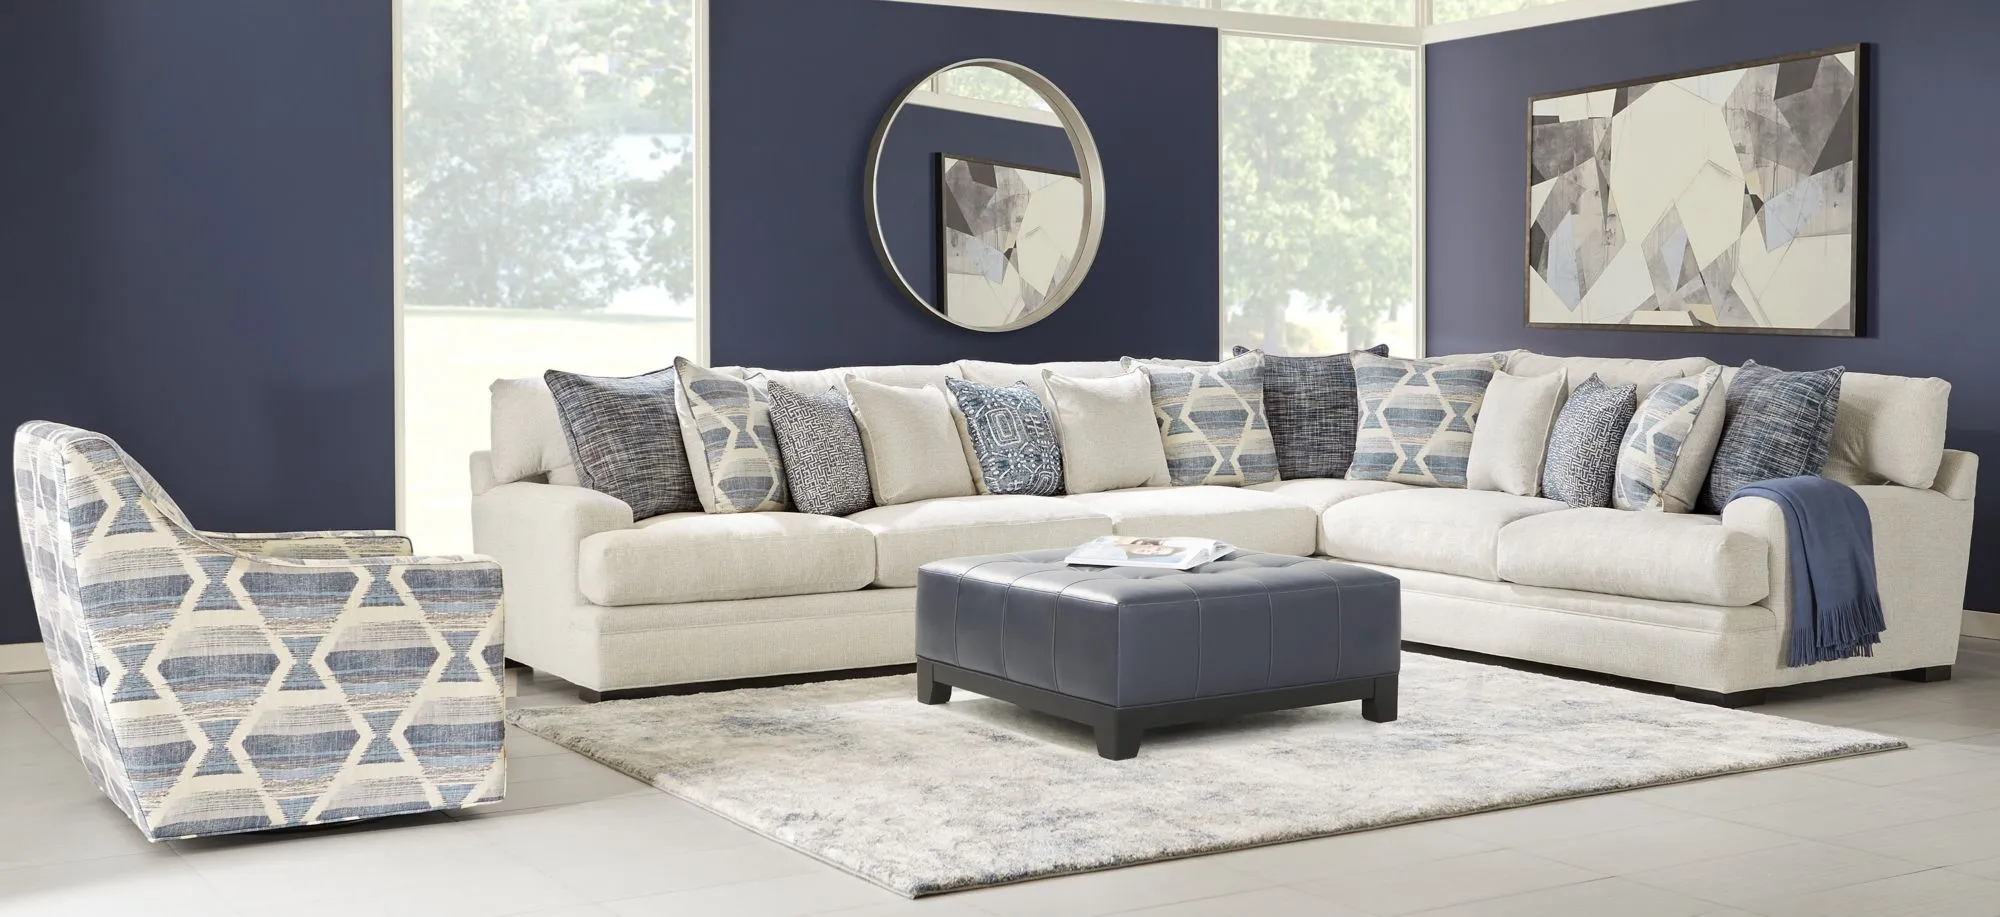 Braelyn 4-pc. Sectional in Braxton Ceramic by H.M. Richards